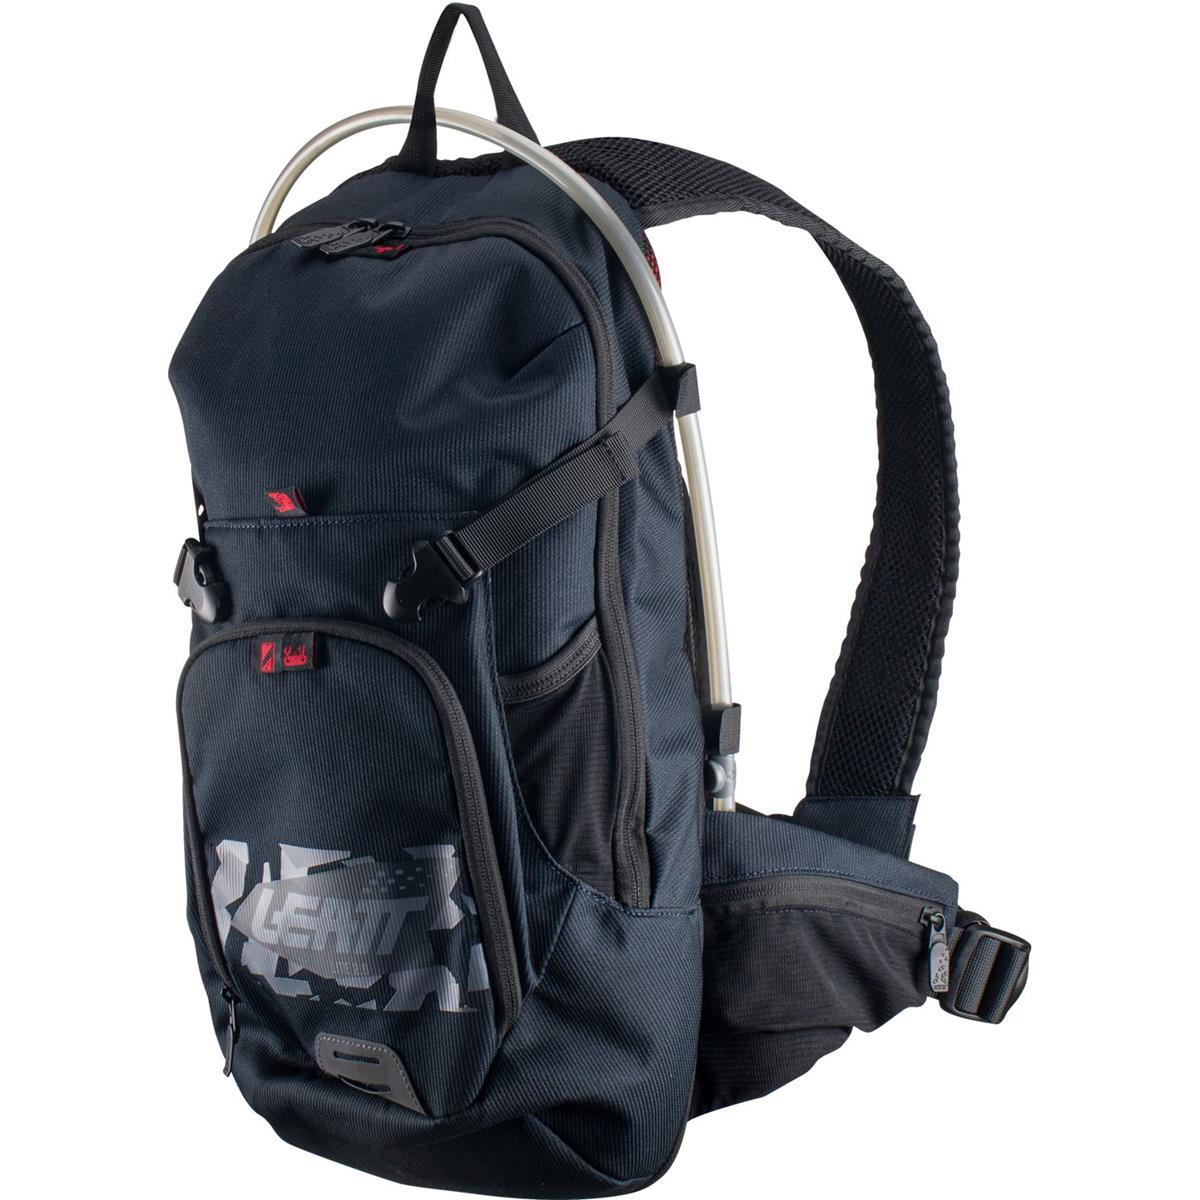 Leatt Backpack with Hydration System Moto Lite 1.5 Black, 1.5 L